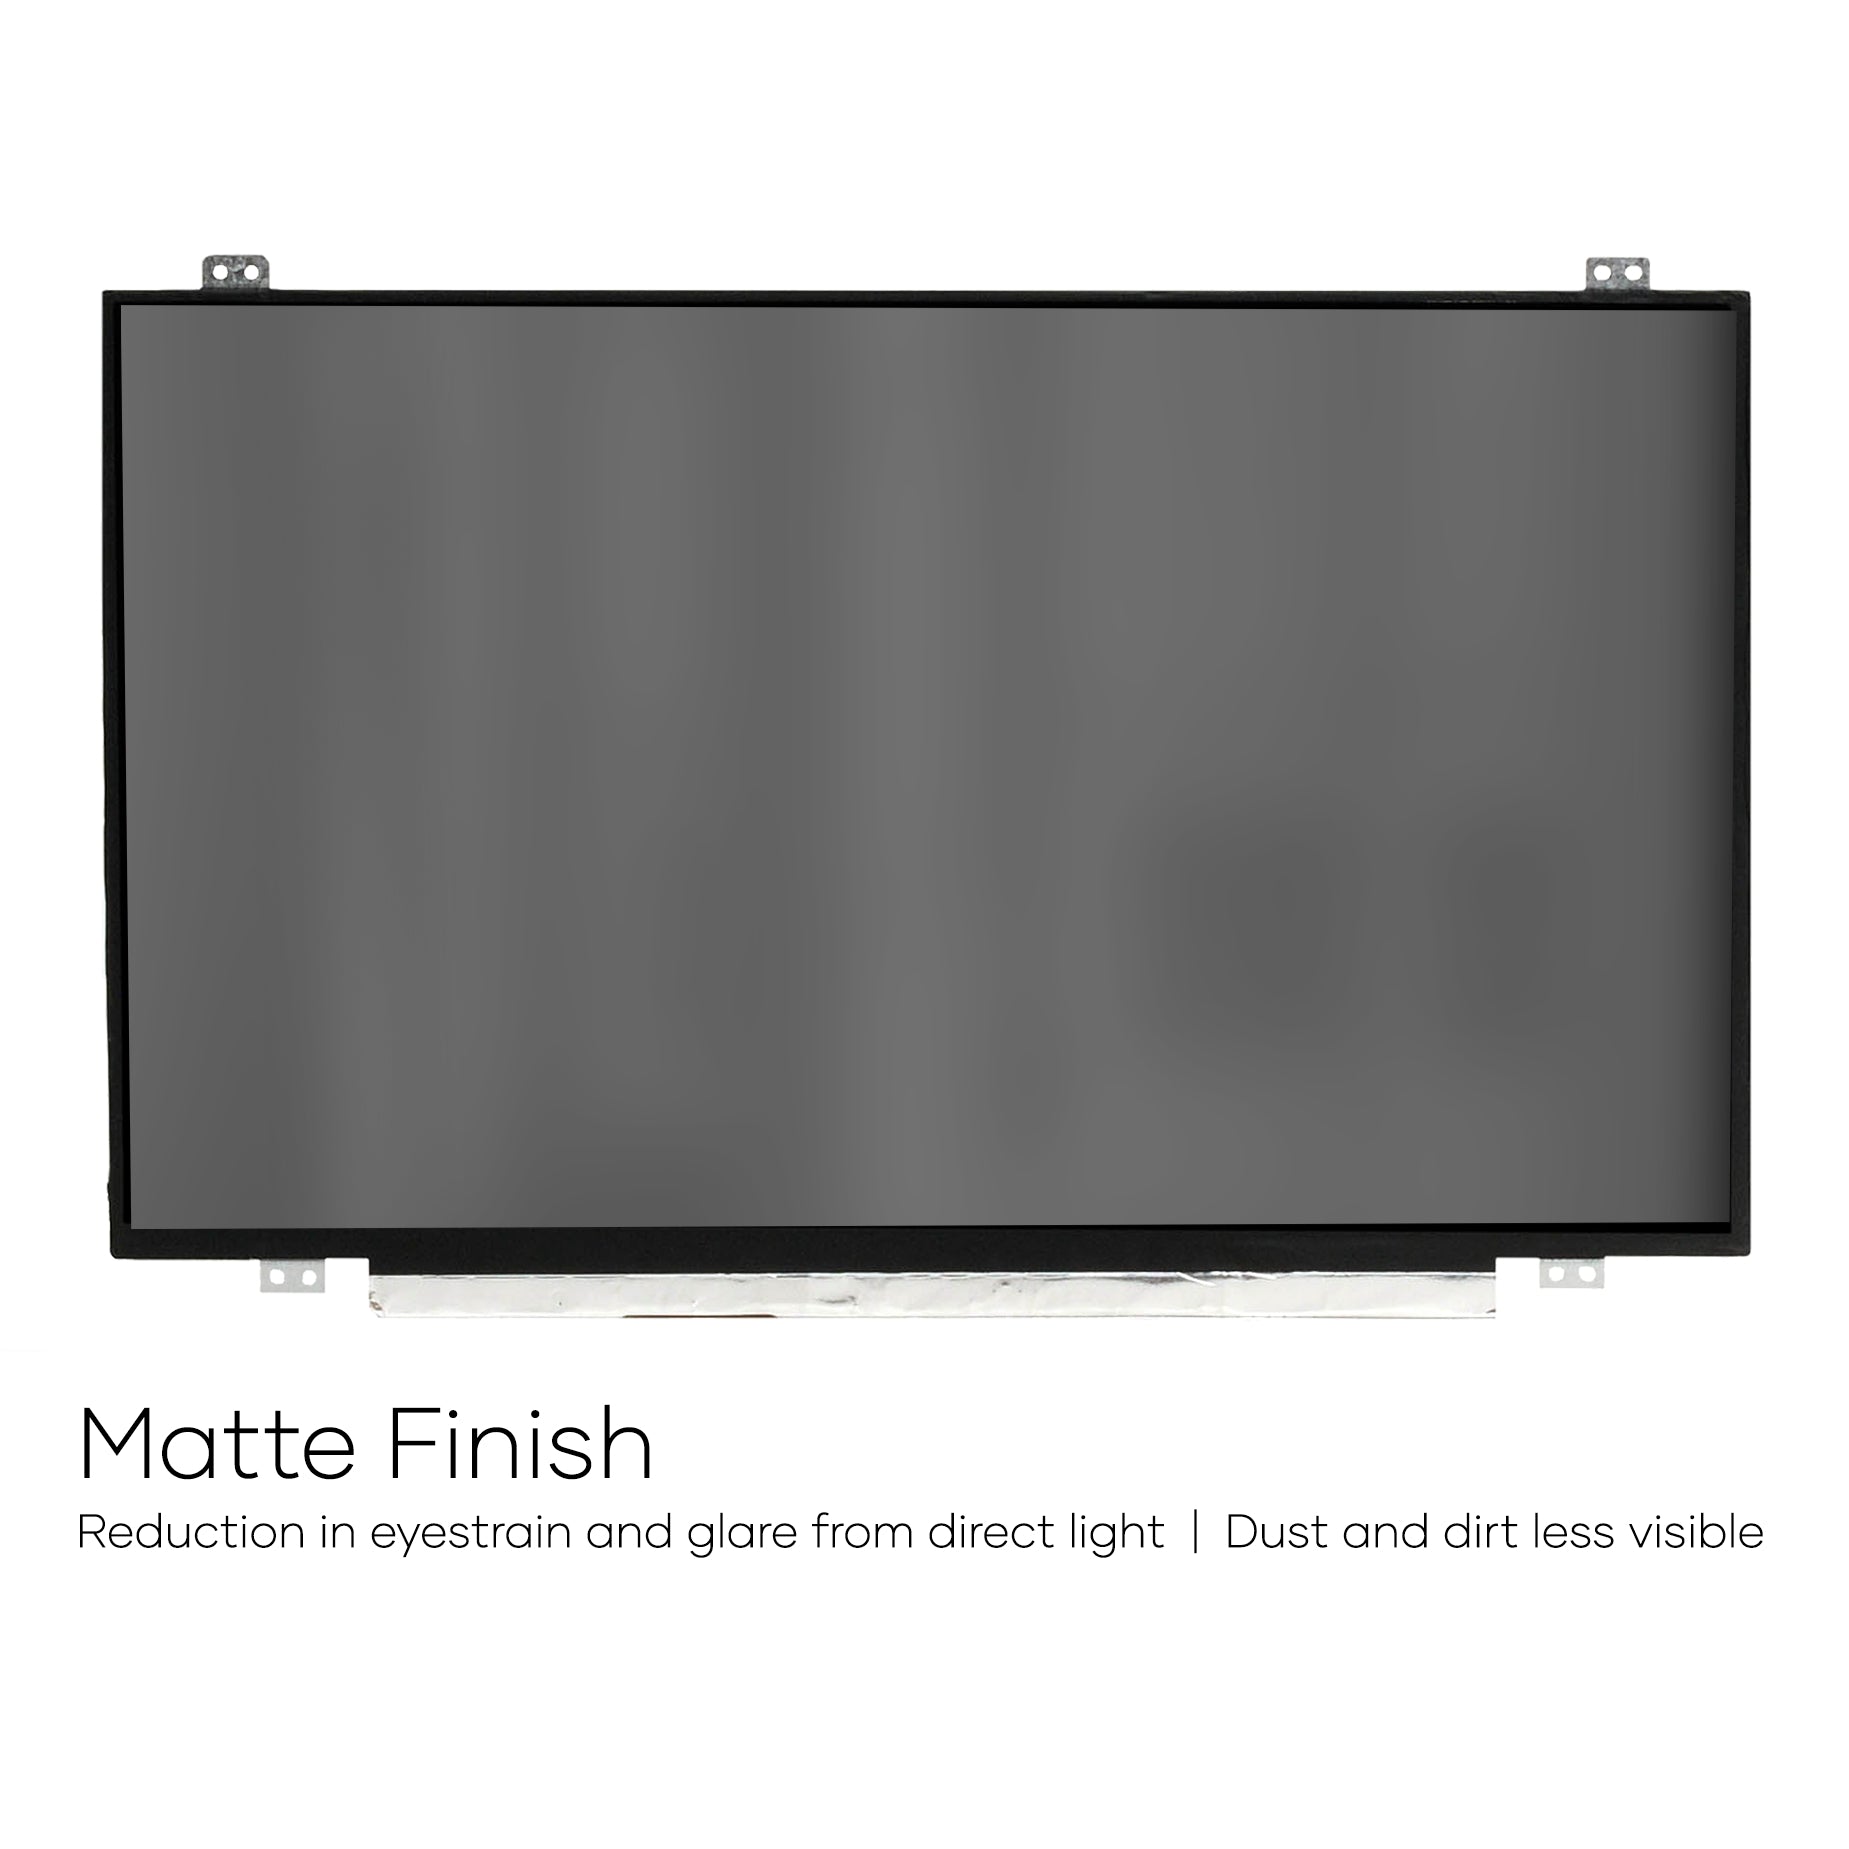 Screen Replacement for LP140WF6(SP)(D3) FHD 1920x1080 IPS Matte LCD LED Display